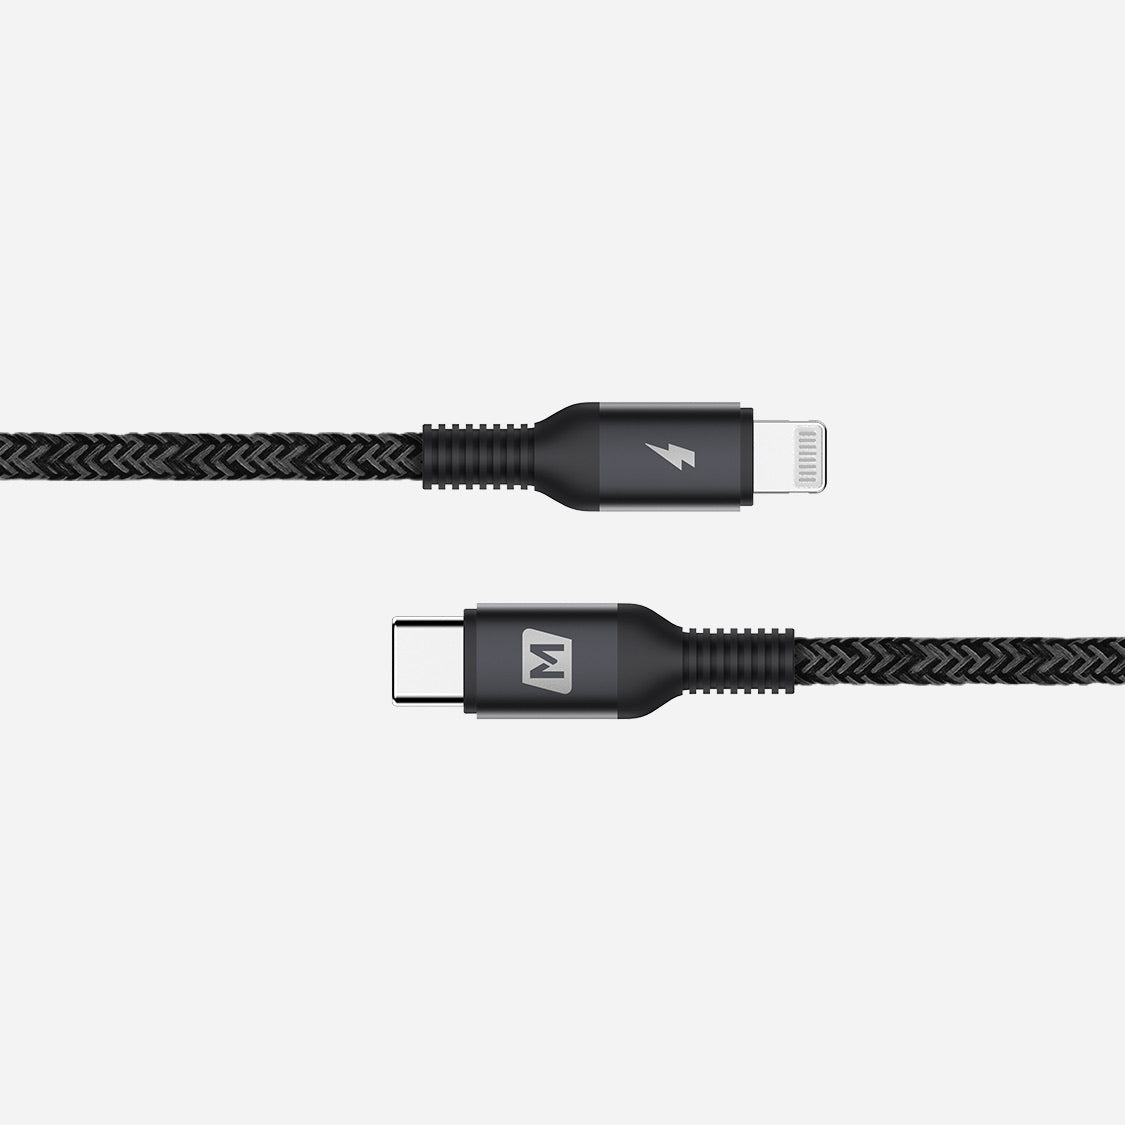 Momax Elite Link Type-C to Lightning Cable Triple Braided 3M - Black - TECH STREET